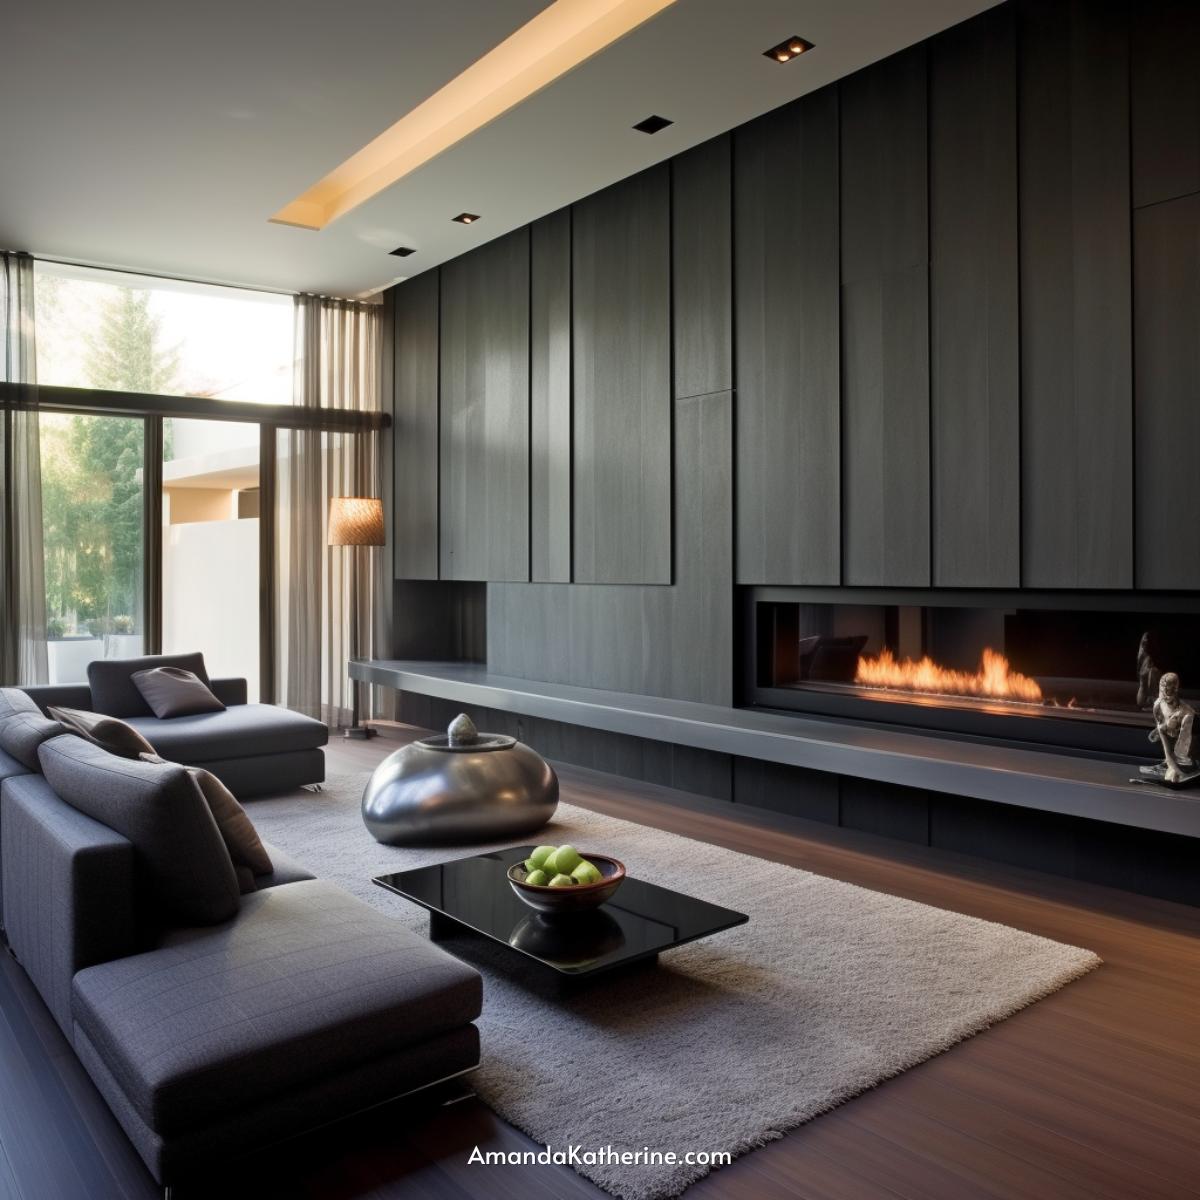 31 Stunning Fireplace Wall Ideas with a TV for Your Living Room | dark gray fireplace idea